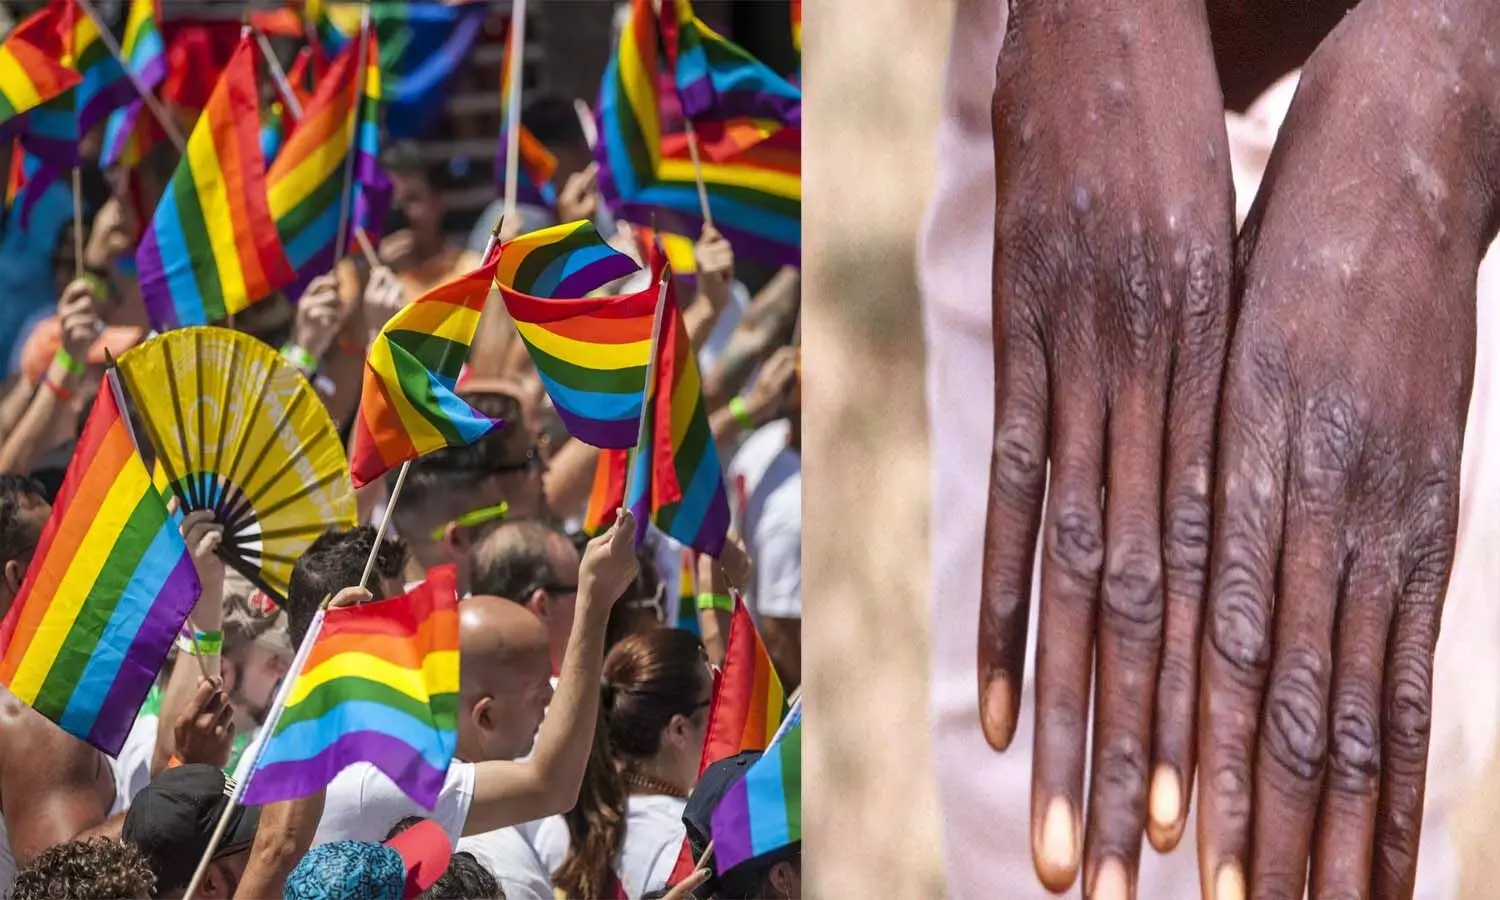 Why is there outrage in the LGBTQ community over monkeypox?